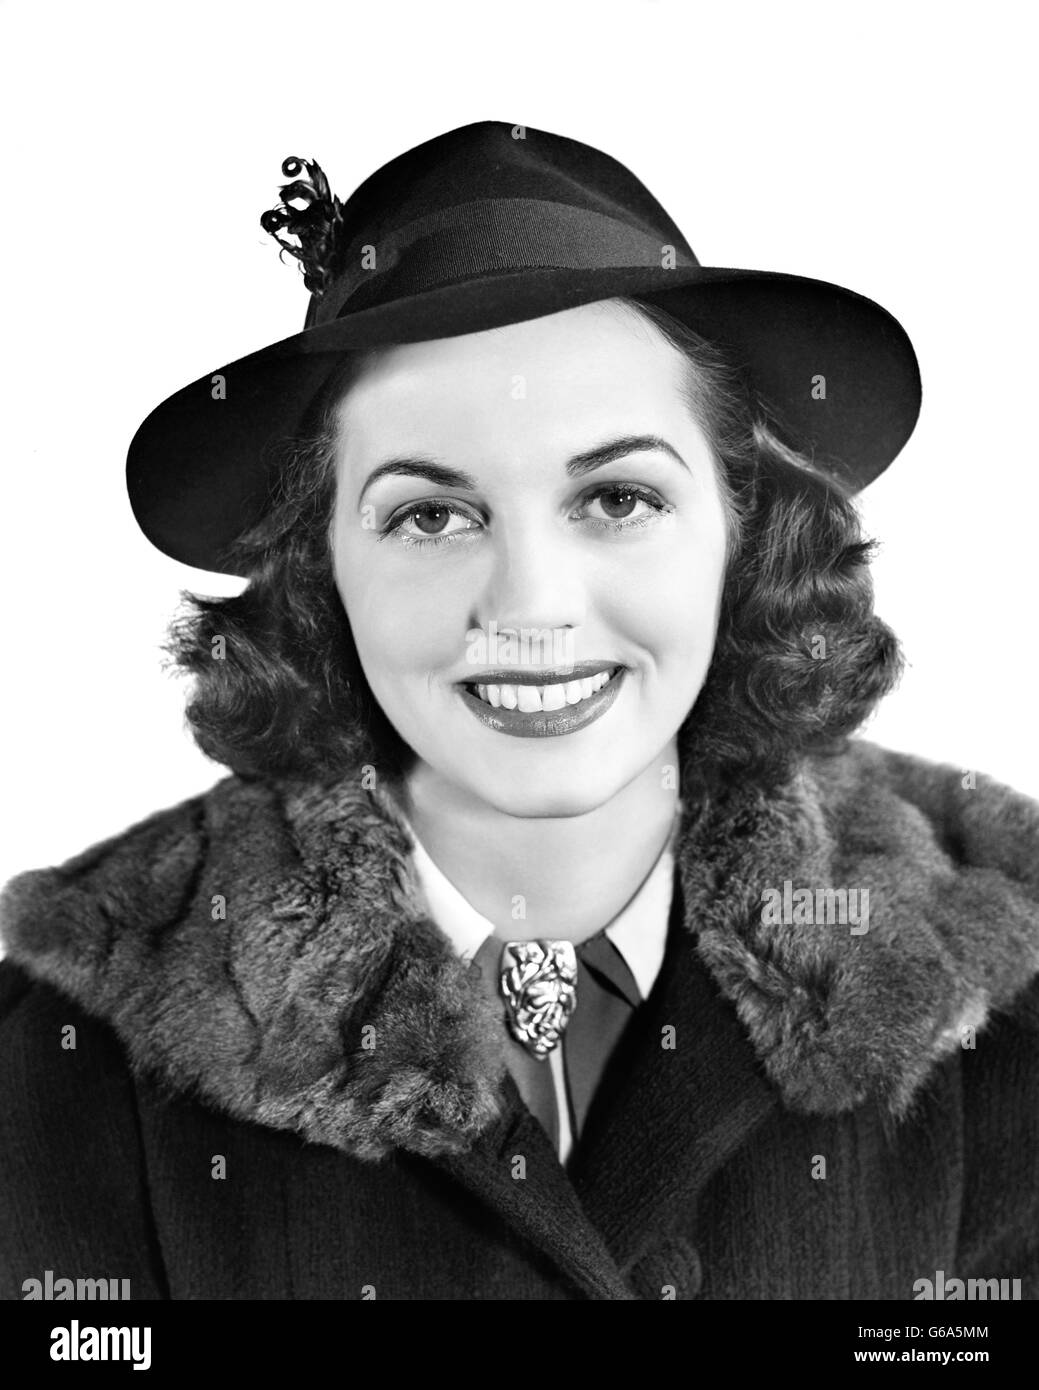 1940s SMILING BRUNETTE WOMAN PORTRAIT WEARING HAT COAT FUR COLLAR LOOKING AT CAMERA Stock Photo